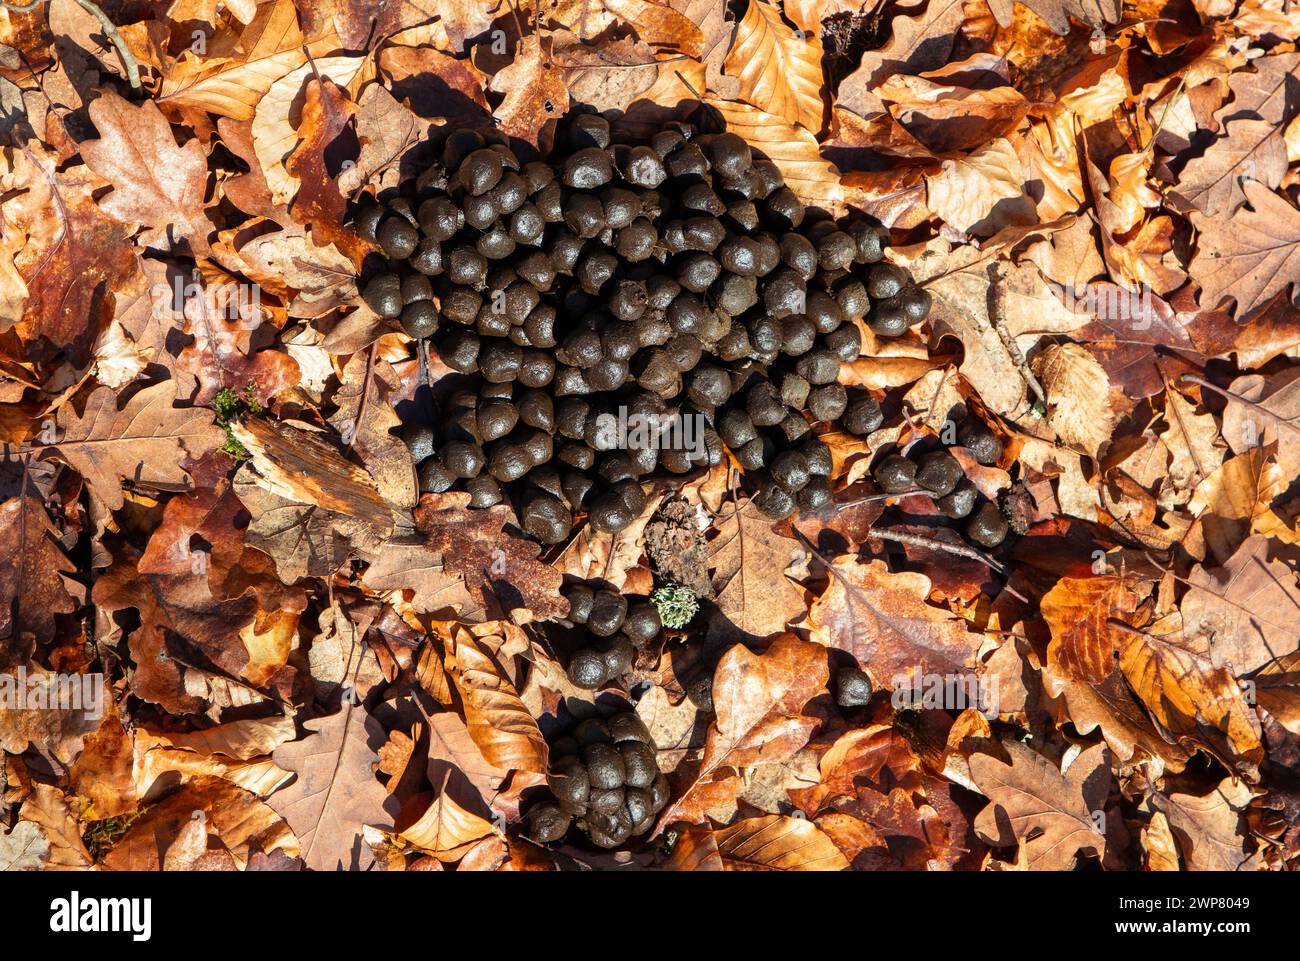 A top view of deer droppings on dried leaves Stock Photo